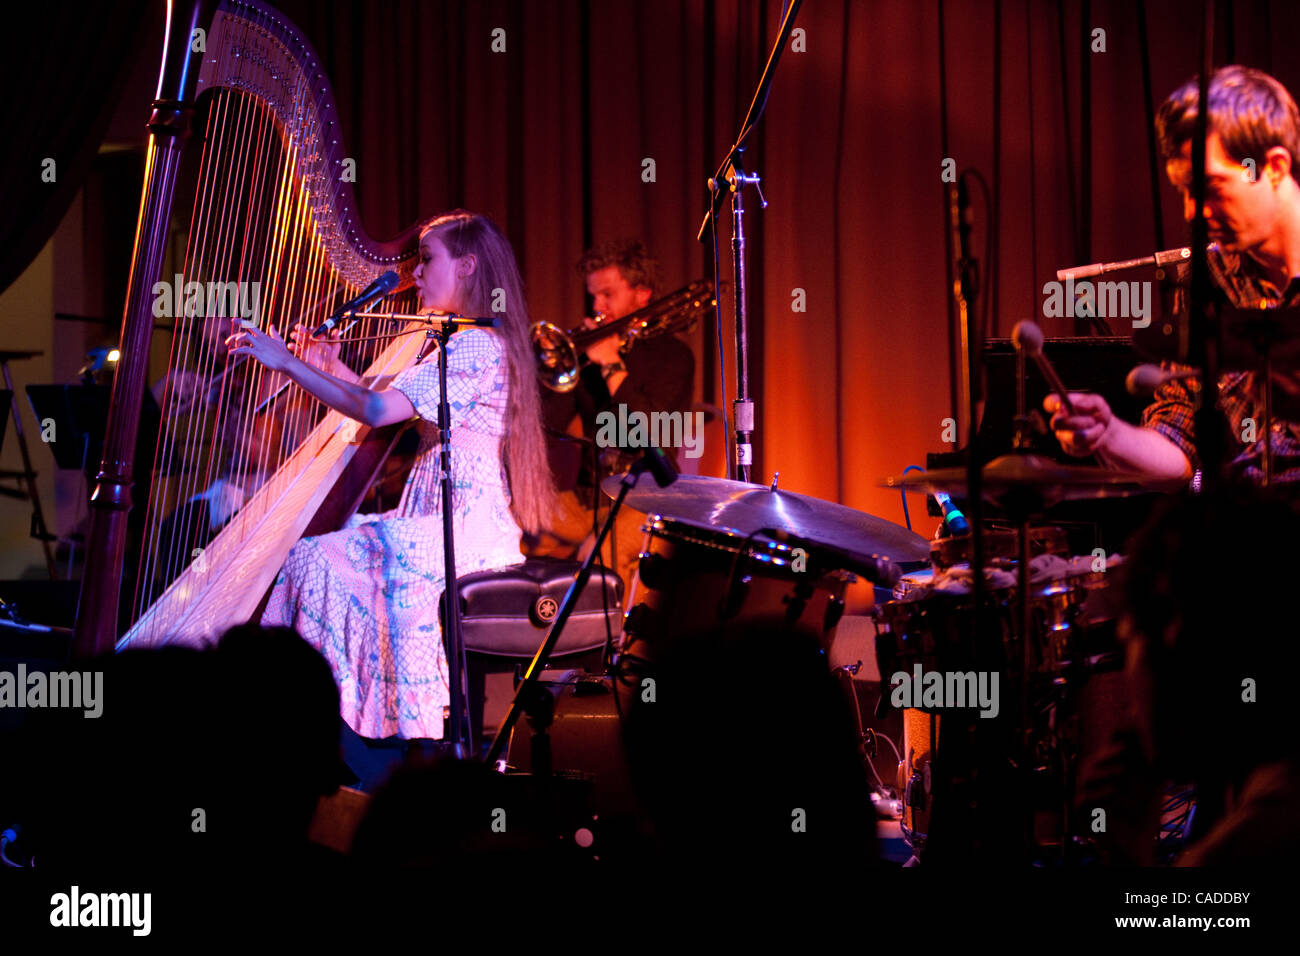 Jul 29, 2010 - San Diego, California, U.S. - Harpist, pianist, and singer-songwriter JOANNA NEWSOM performs with her band at The San Diego Women's Club. (Credit Image: © Max Dolberg/ZUMApress.com) Stock Photo